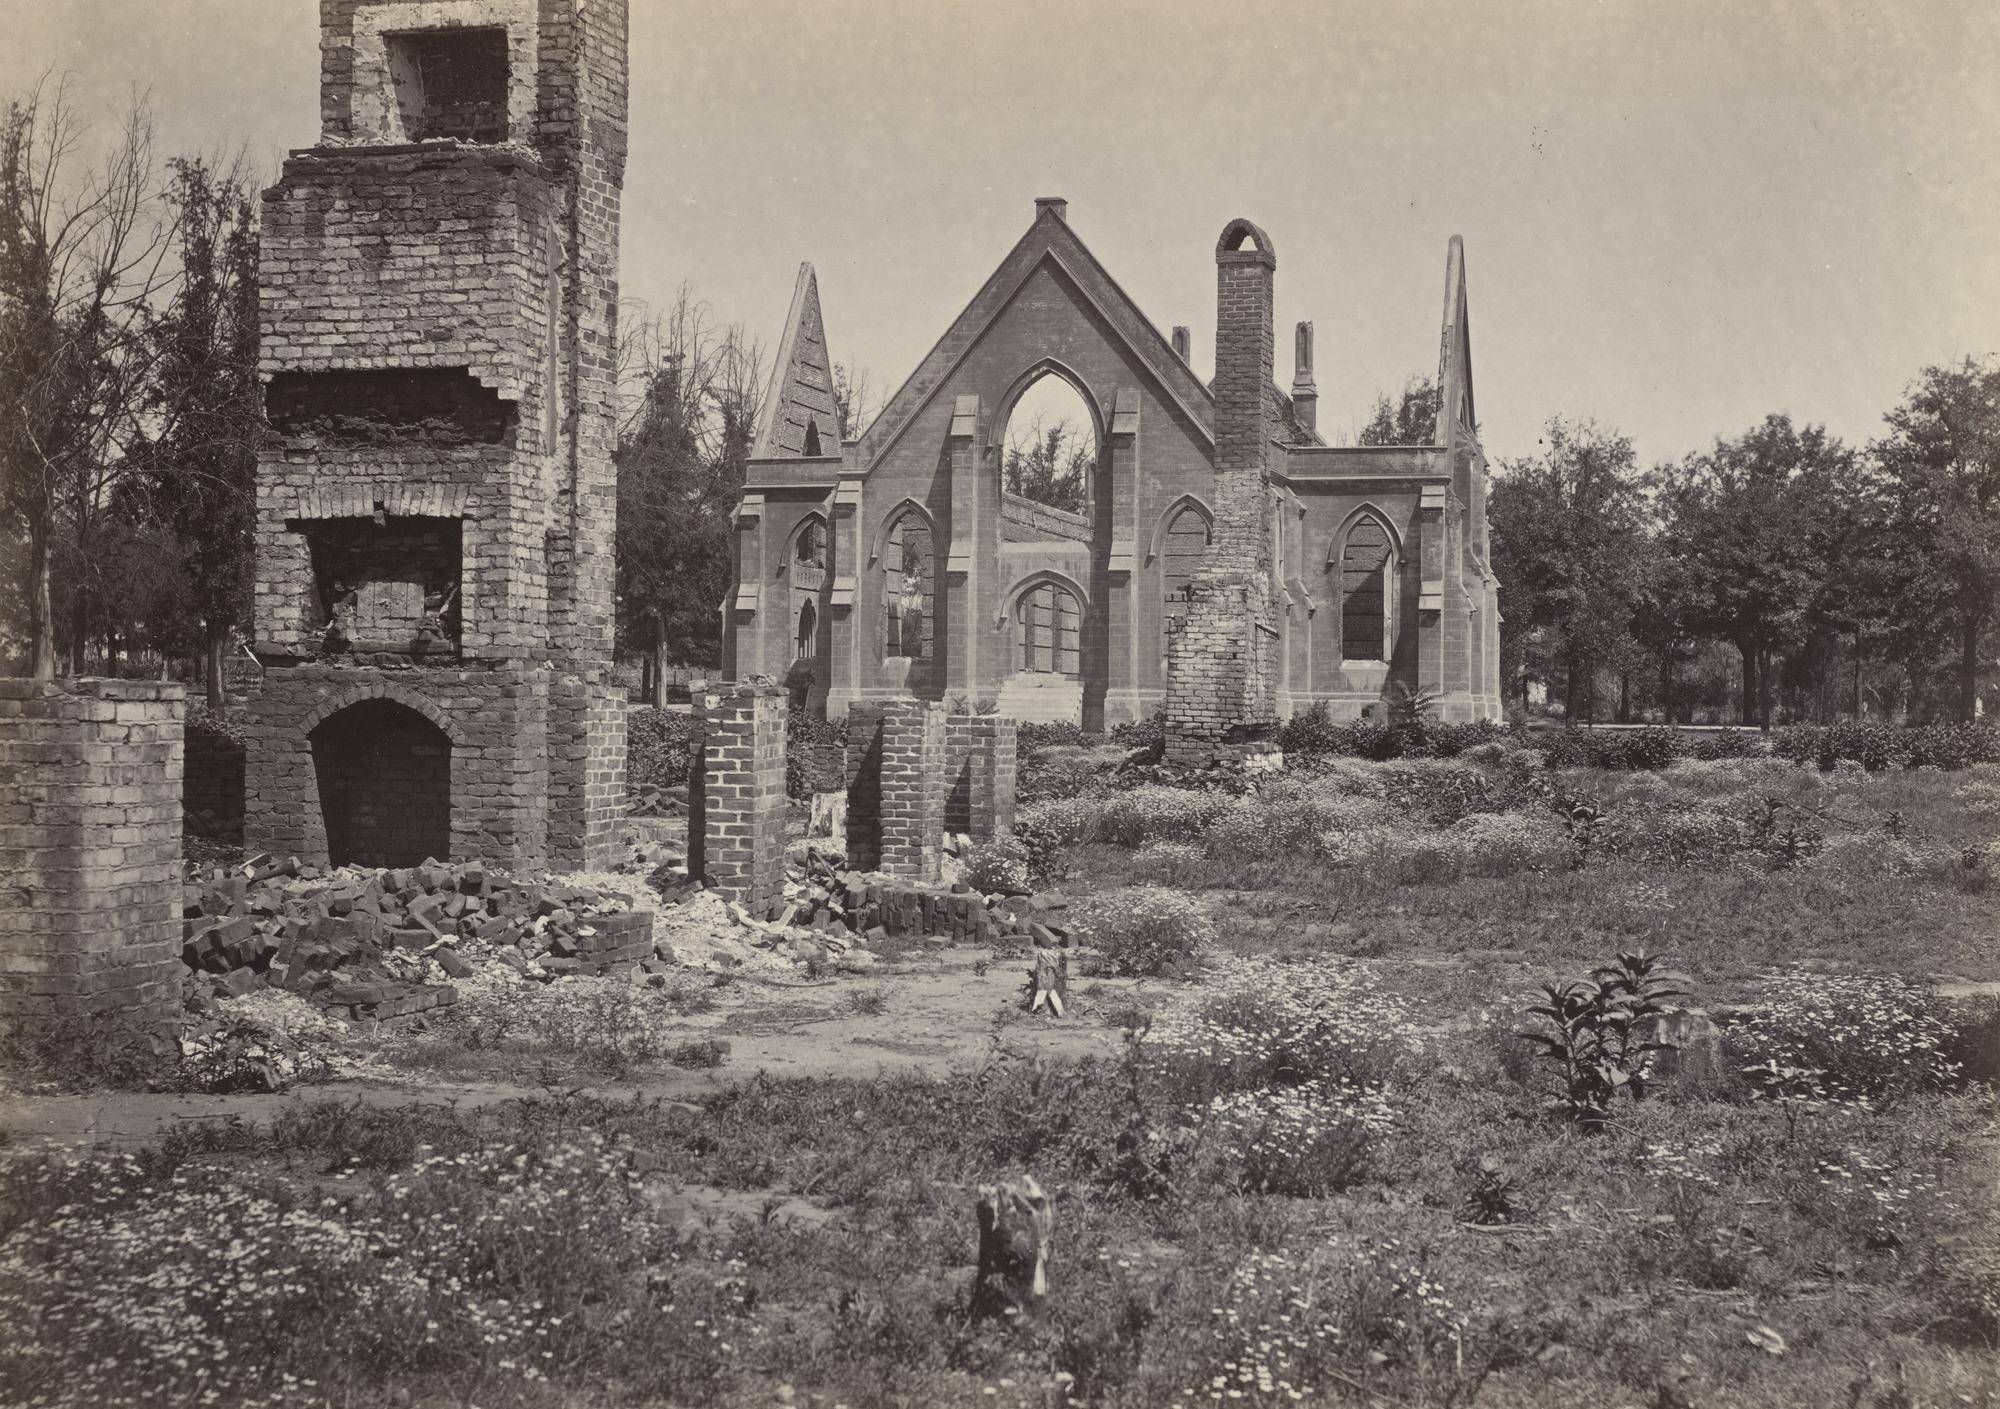 Ruins in Columbia, South Carolina from the album Photographic Views of Sherman's Campaign